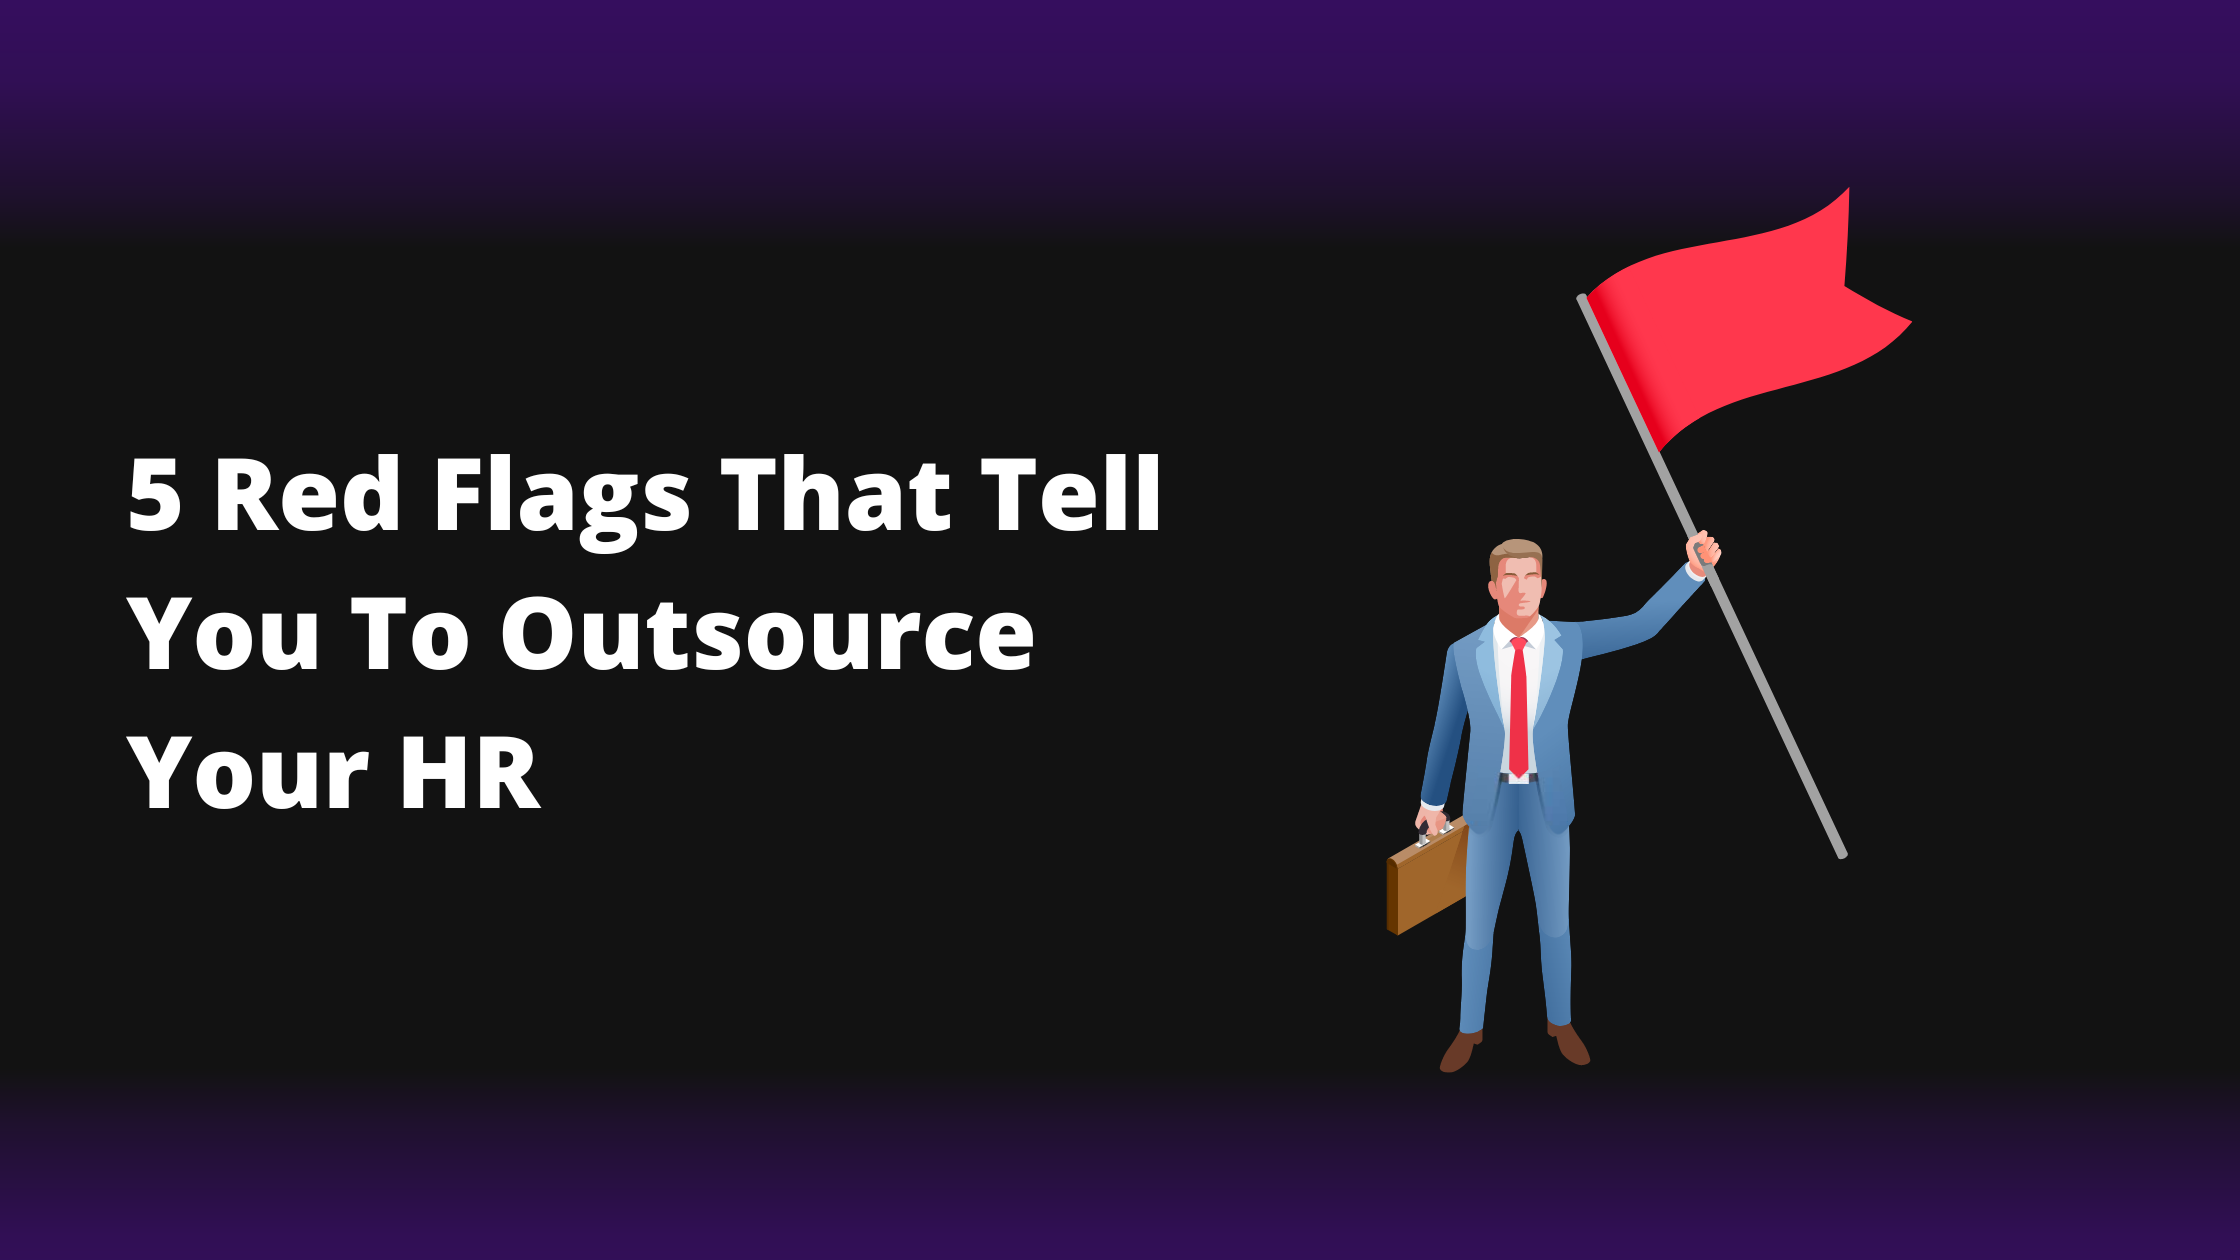 5 Red Flags That You Should Outsource Your HR